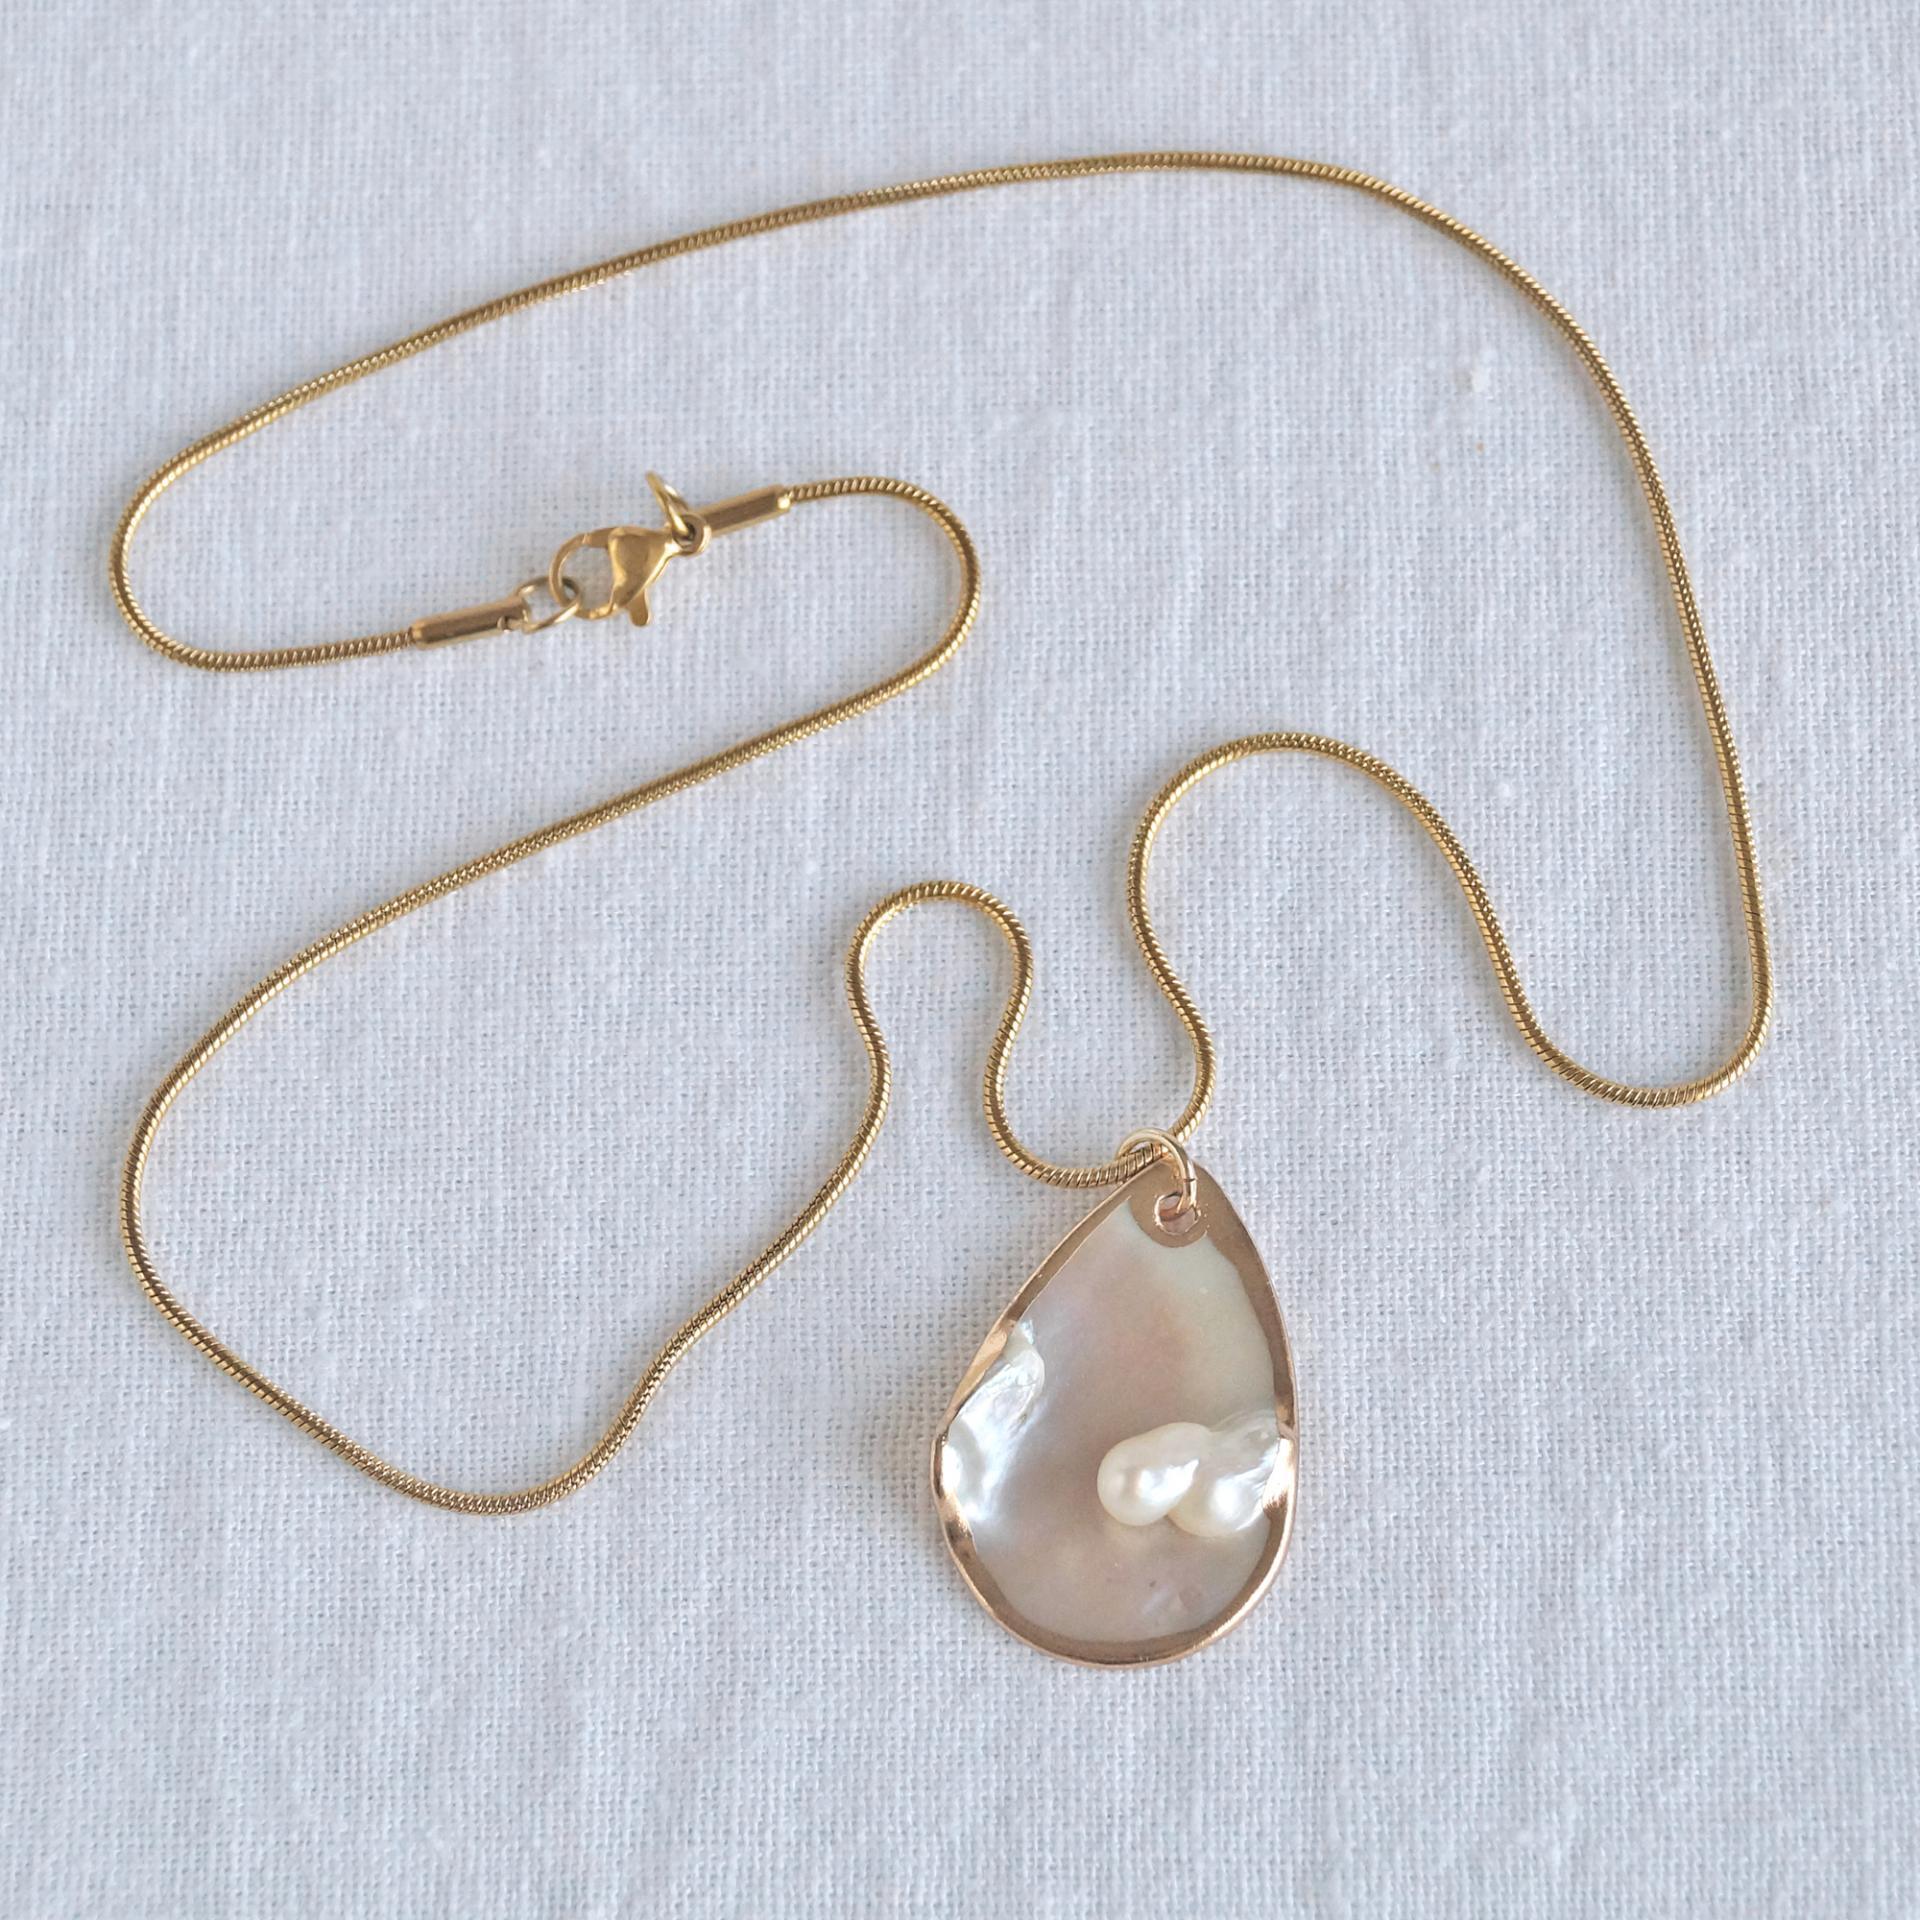 Mother of PEARL necklace, choose gold snake chain